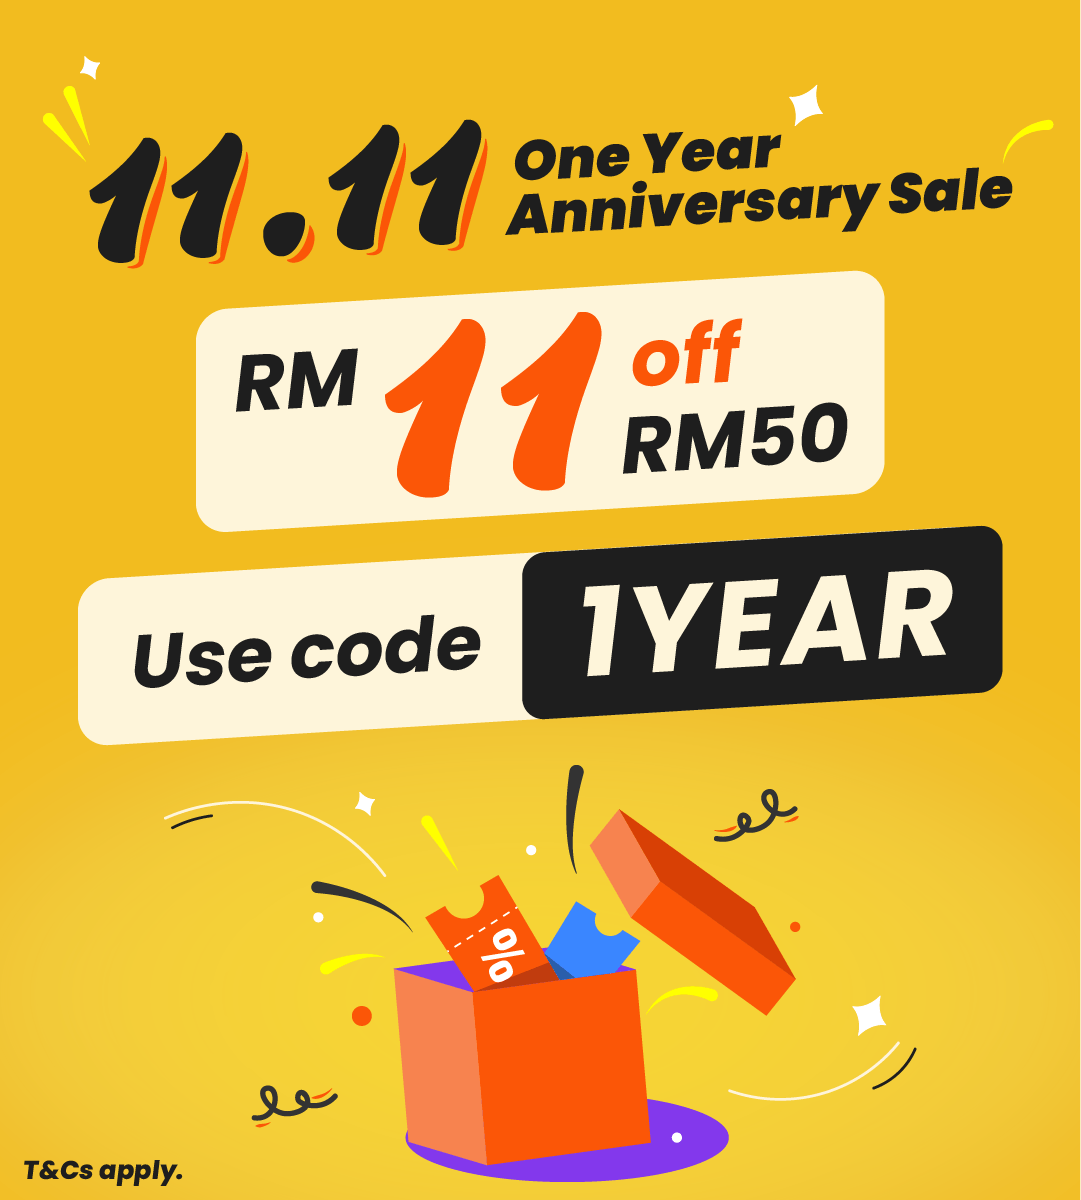 11.11 Anniversary Sale: RM11 Off RM50 Sitewide